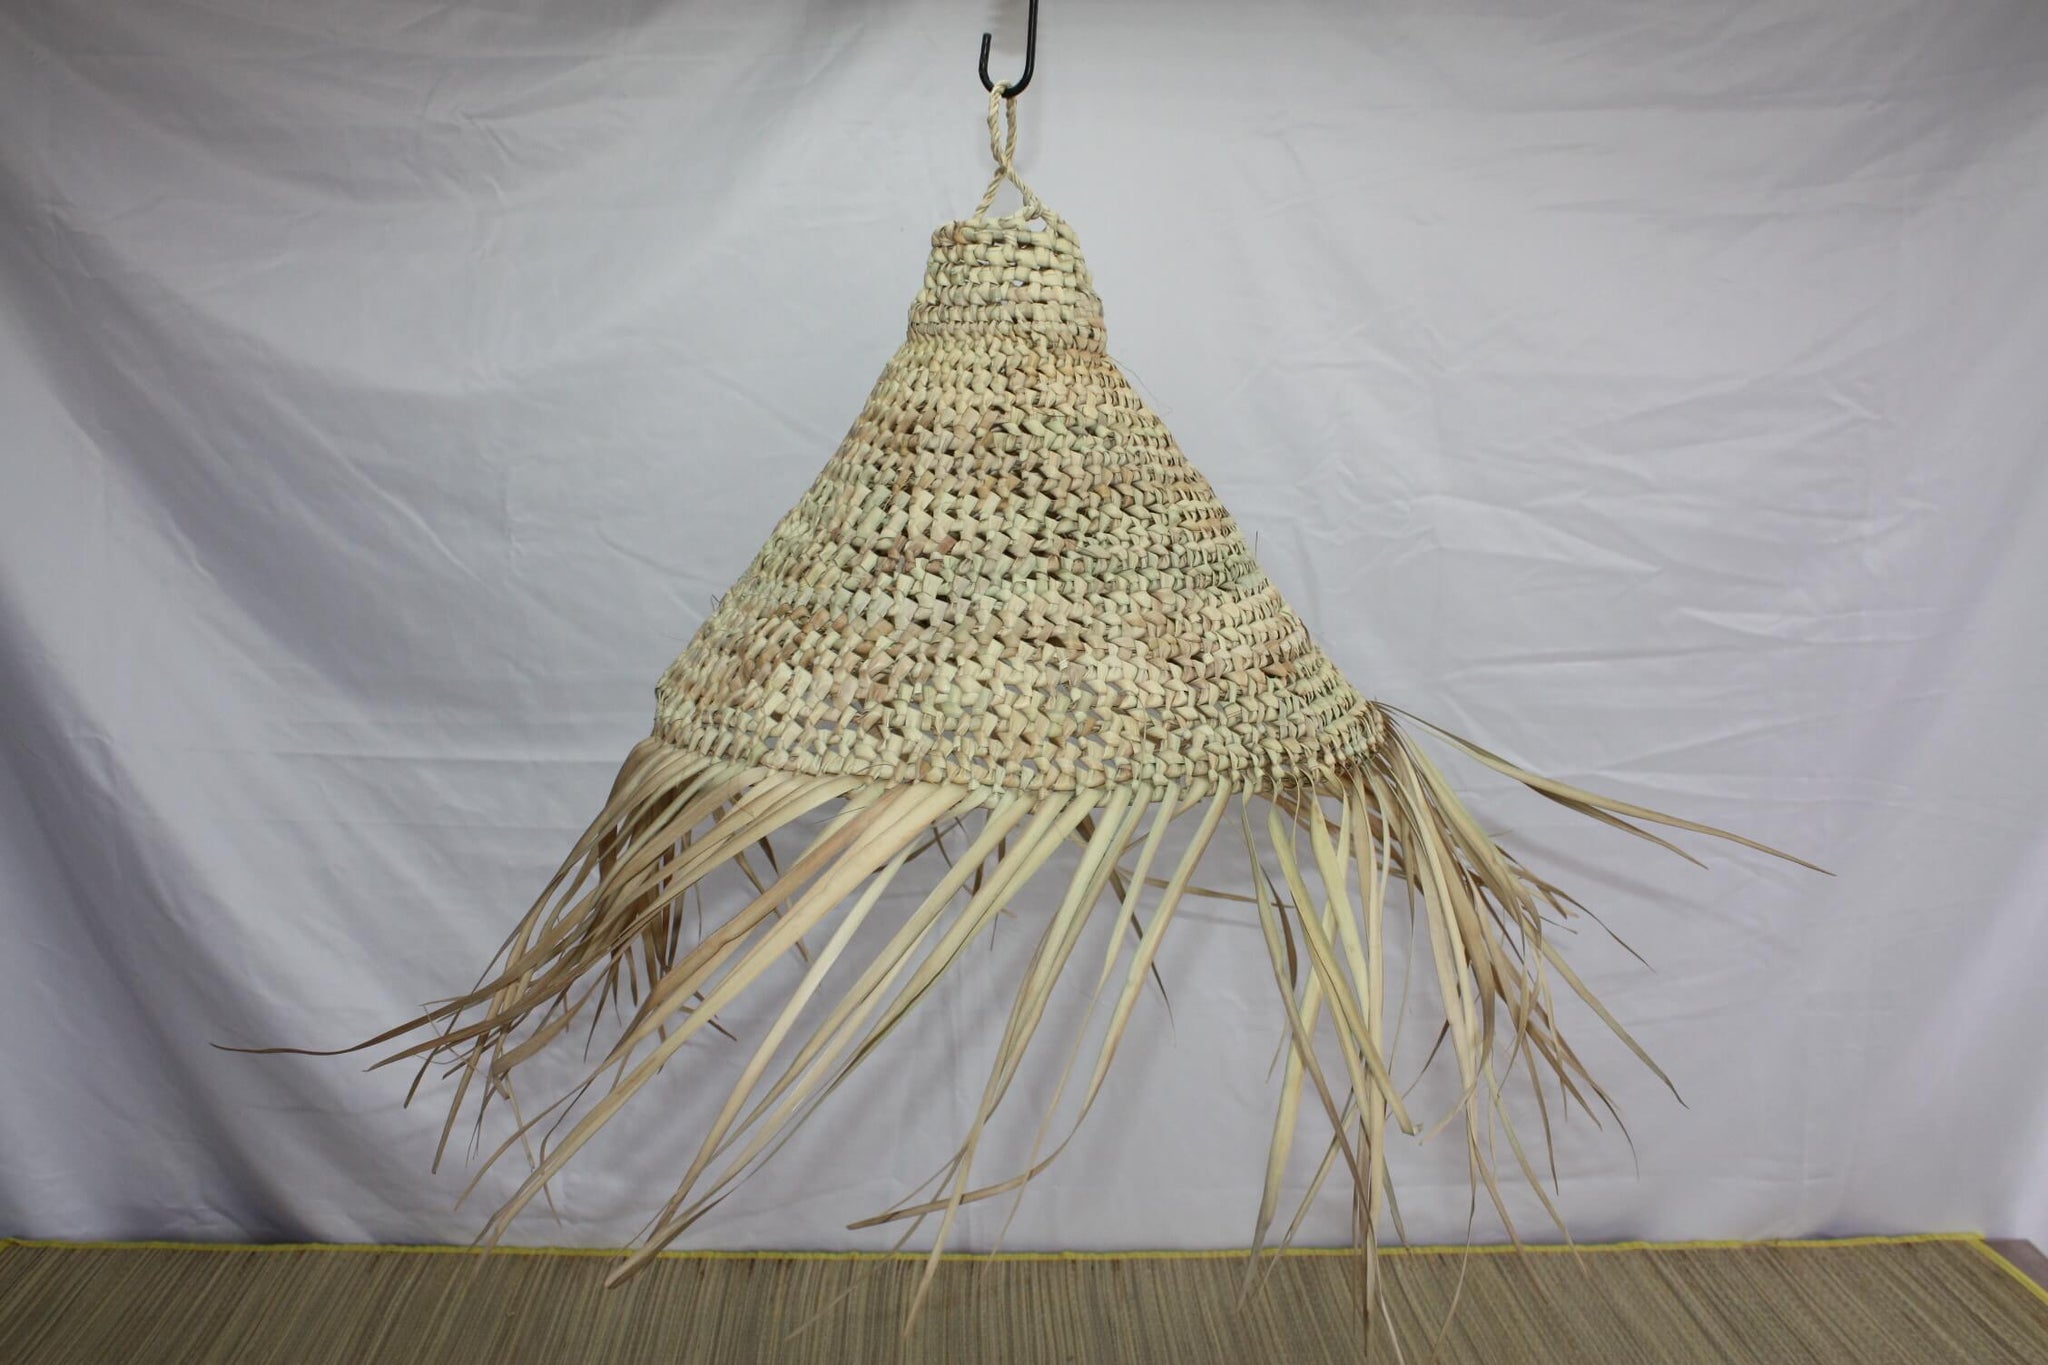 SUSPENSION Cone Paille - Luminaire Chandelier Openwork lampshade - 2 SIZES to CHOOSE - Moroccan rattan